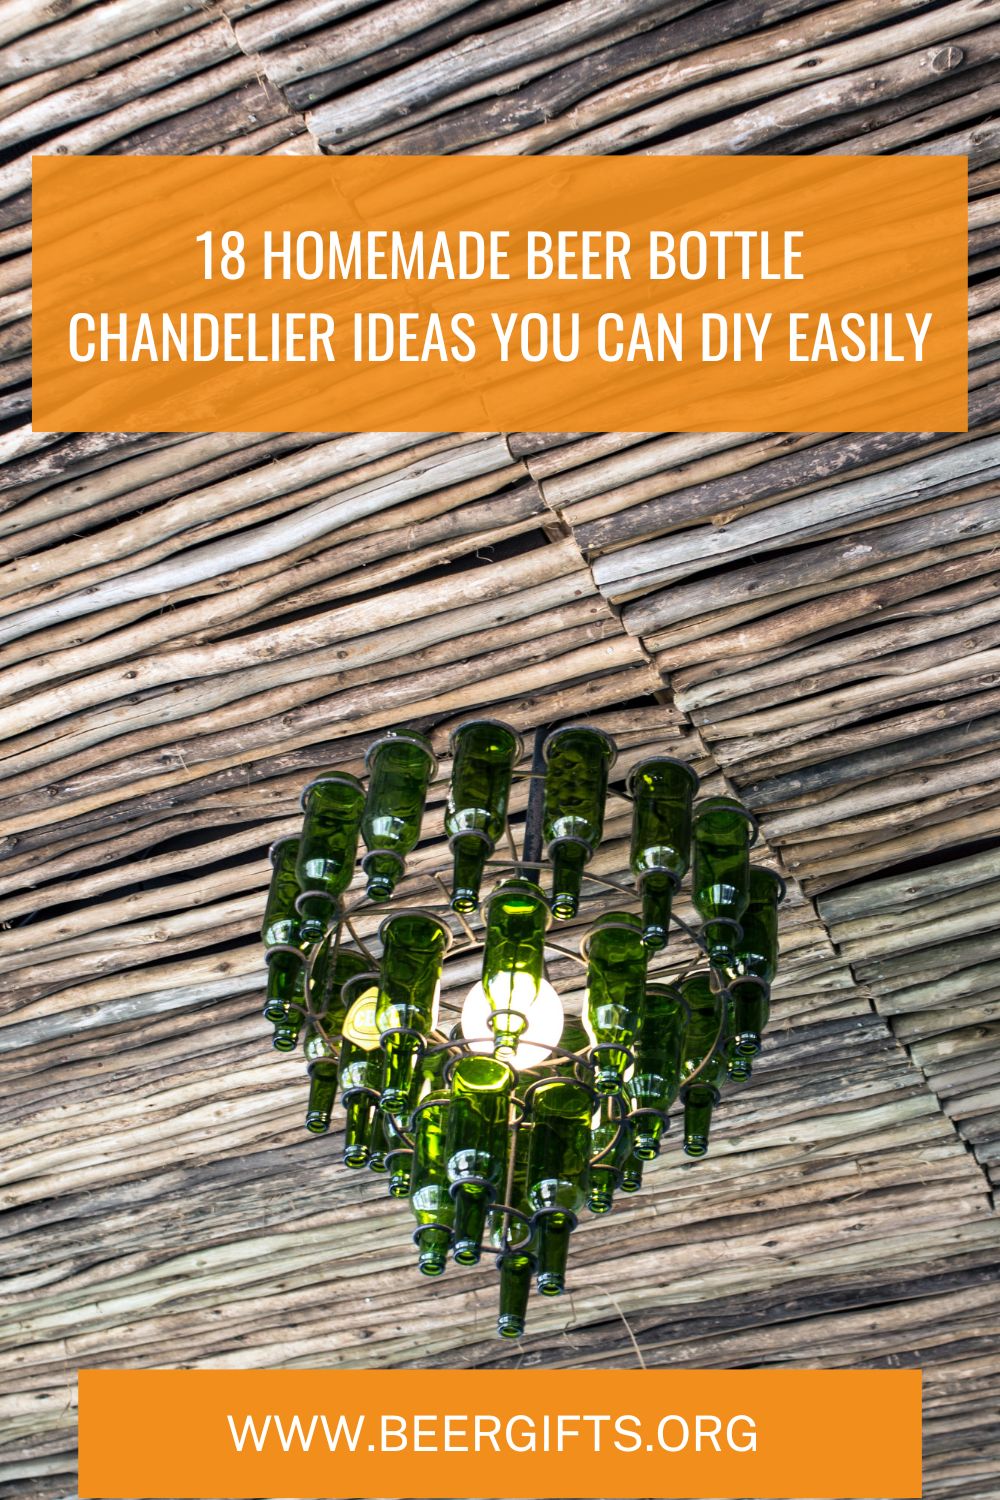 18 Homemade Beer Bottle Chandelier Ideas You Can DIY Easily1